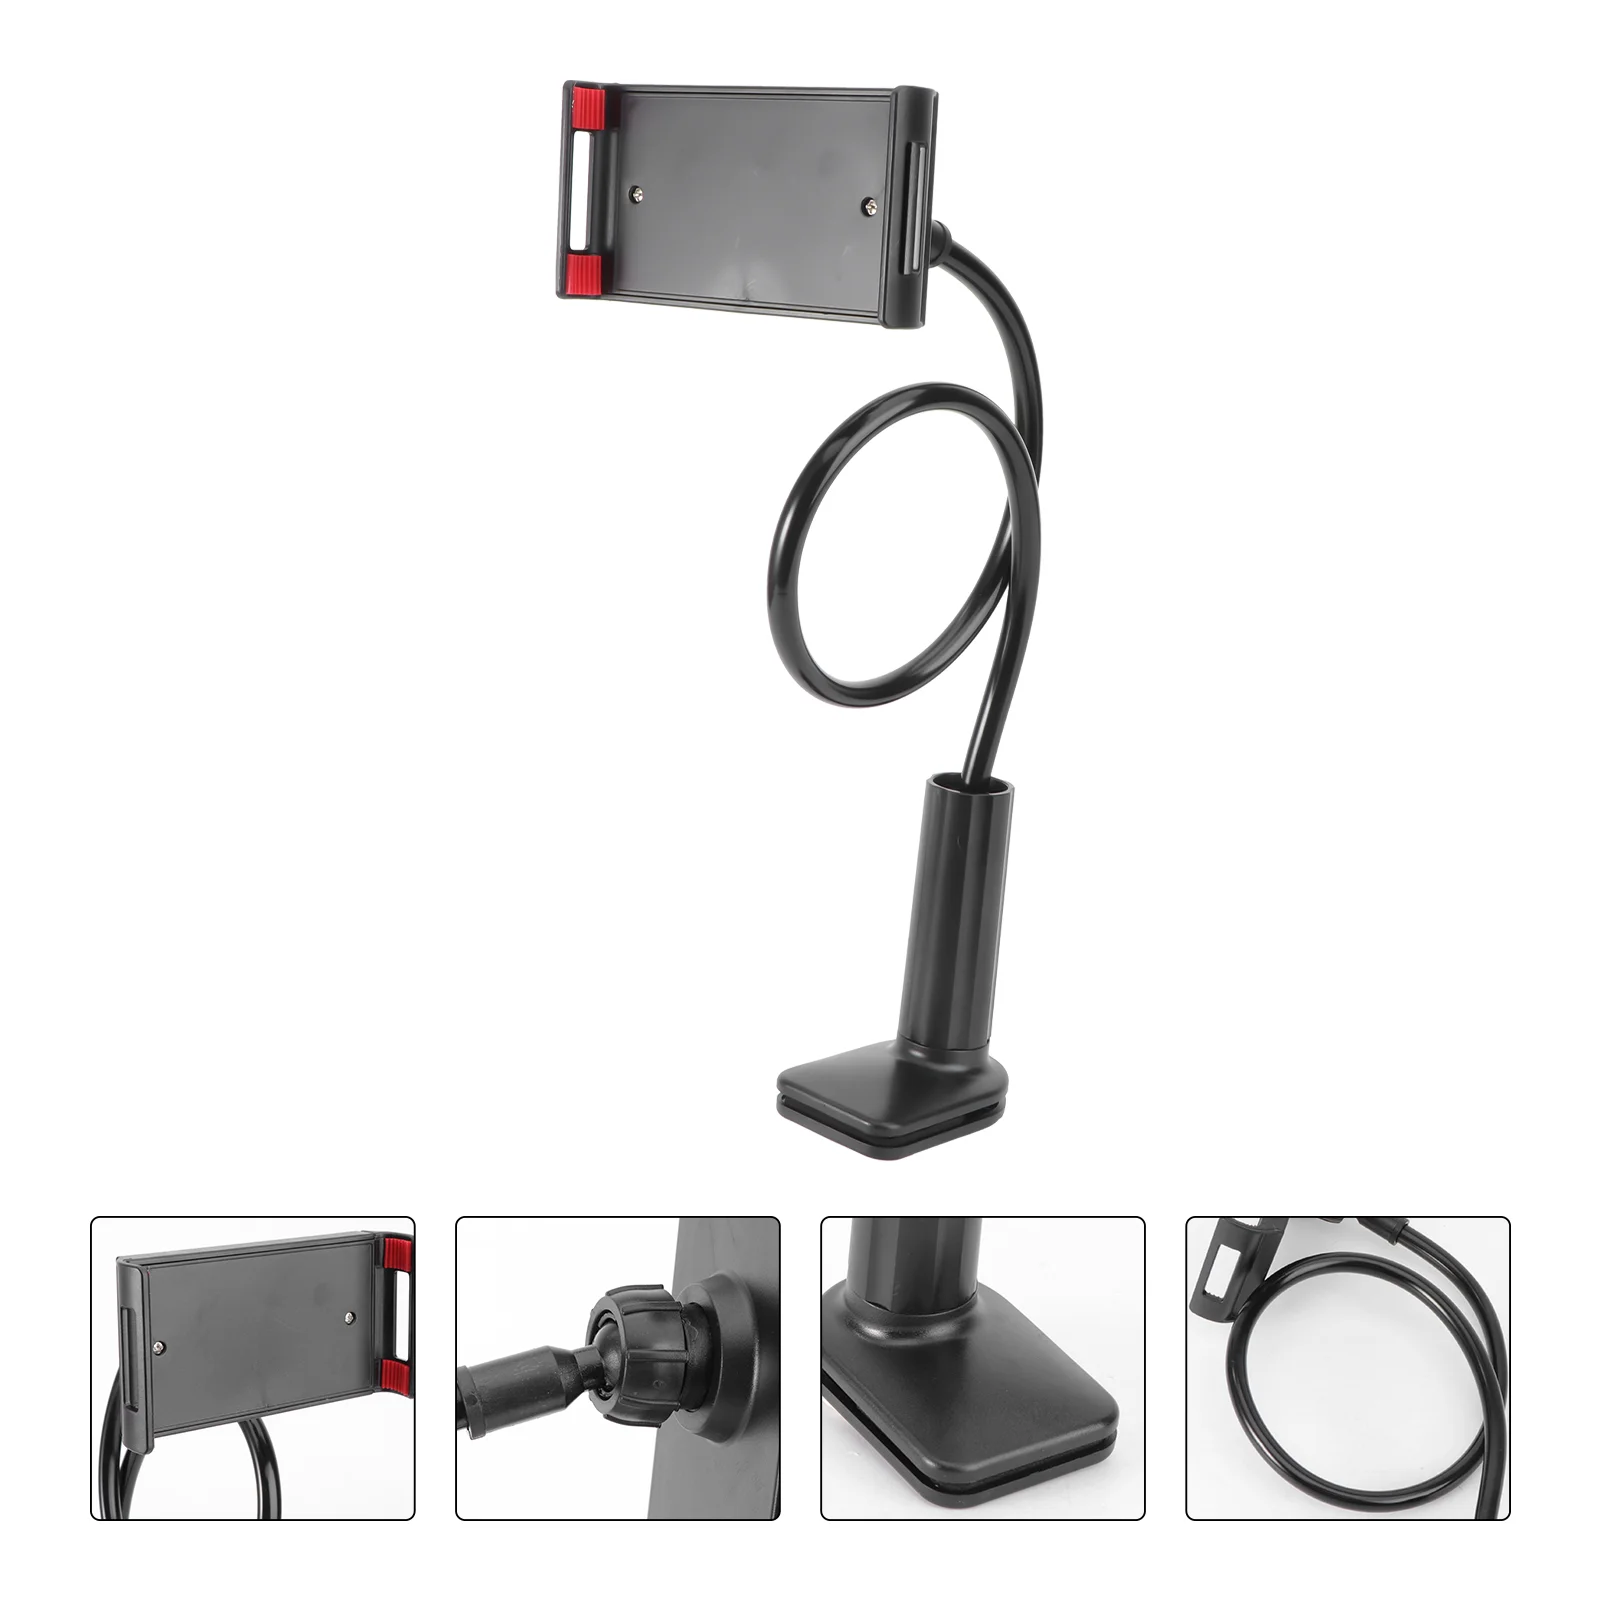 

Universal Cell Phone Holder Lazy Bracket Mobile Phone Stand Flexible Gooseneck Long Arm Clip for Smartphone or Tablet Devices